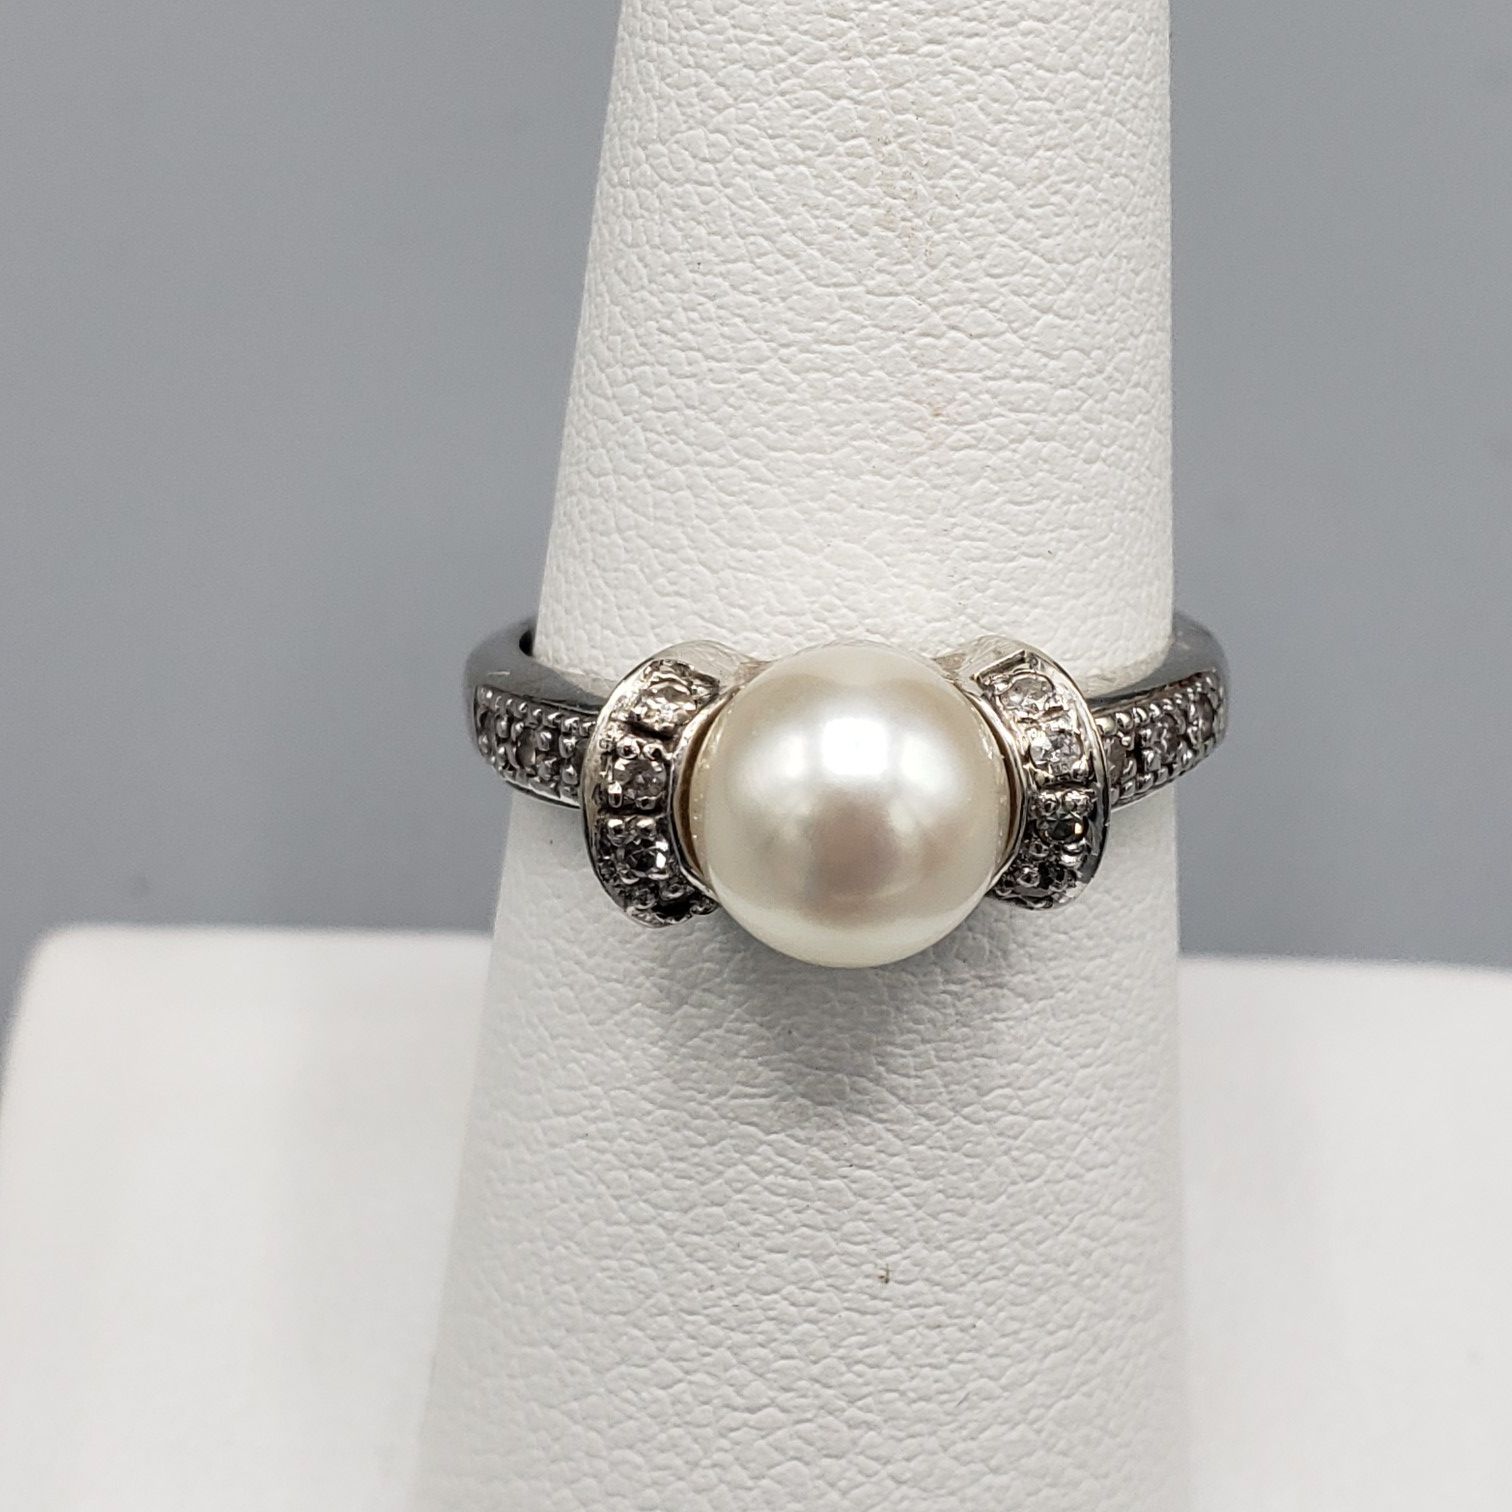 Size 7.5 14k White Gold Pearl Ring